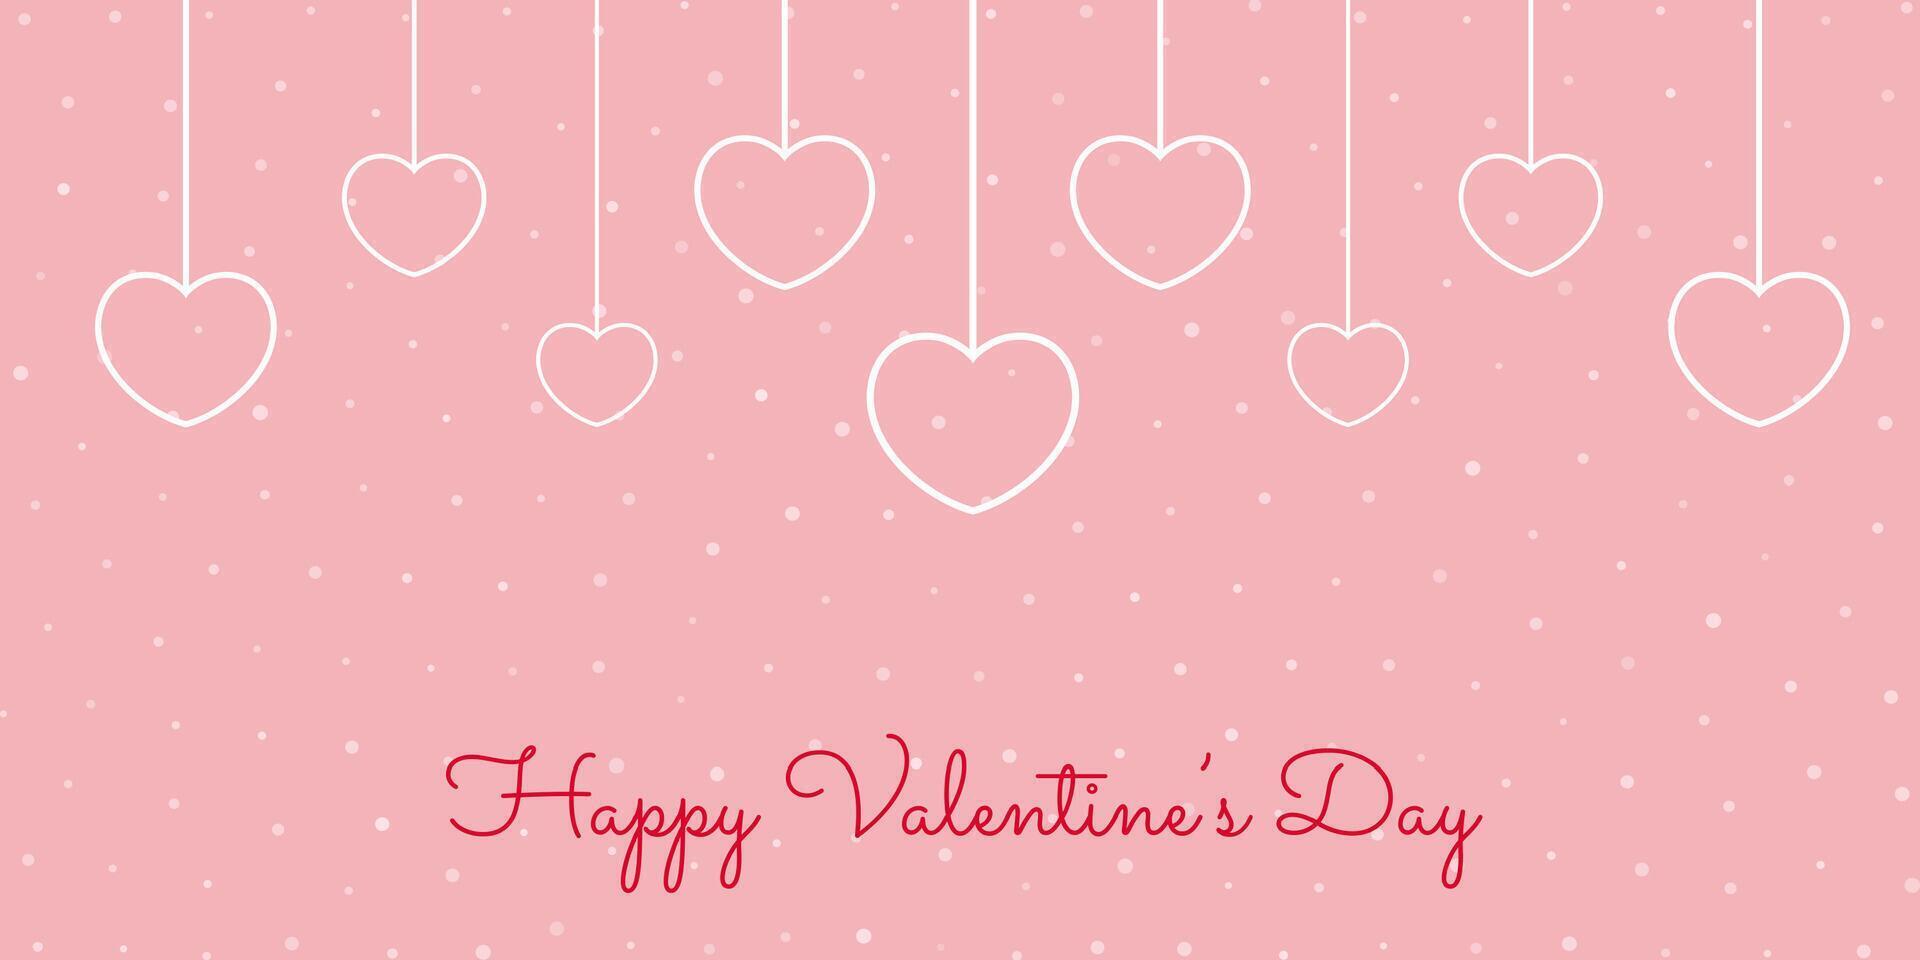 Valentines Day banner with hanging hearts design vector